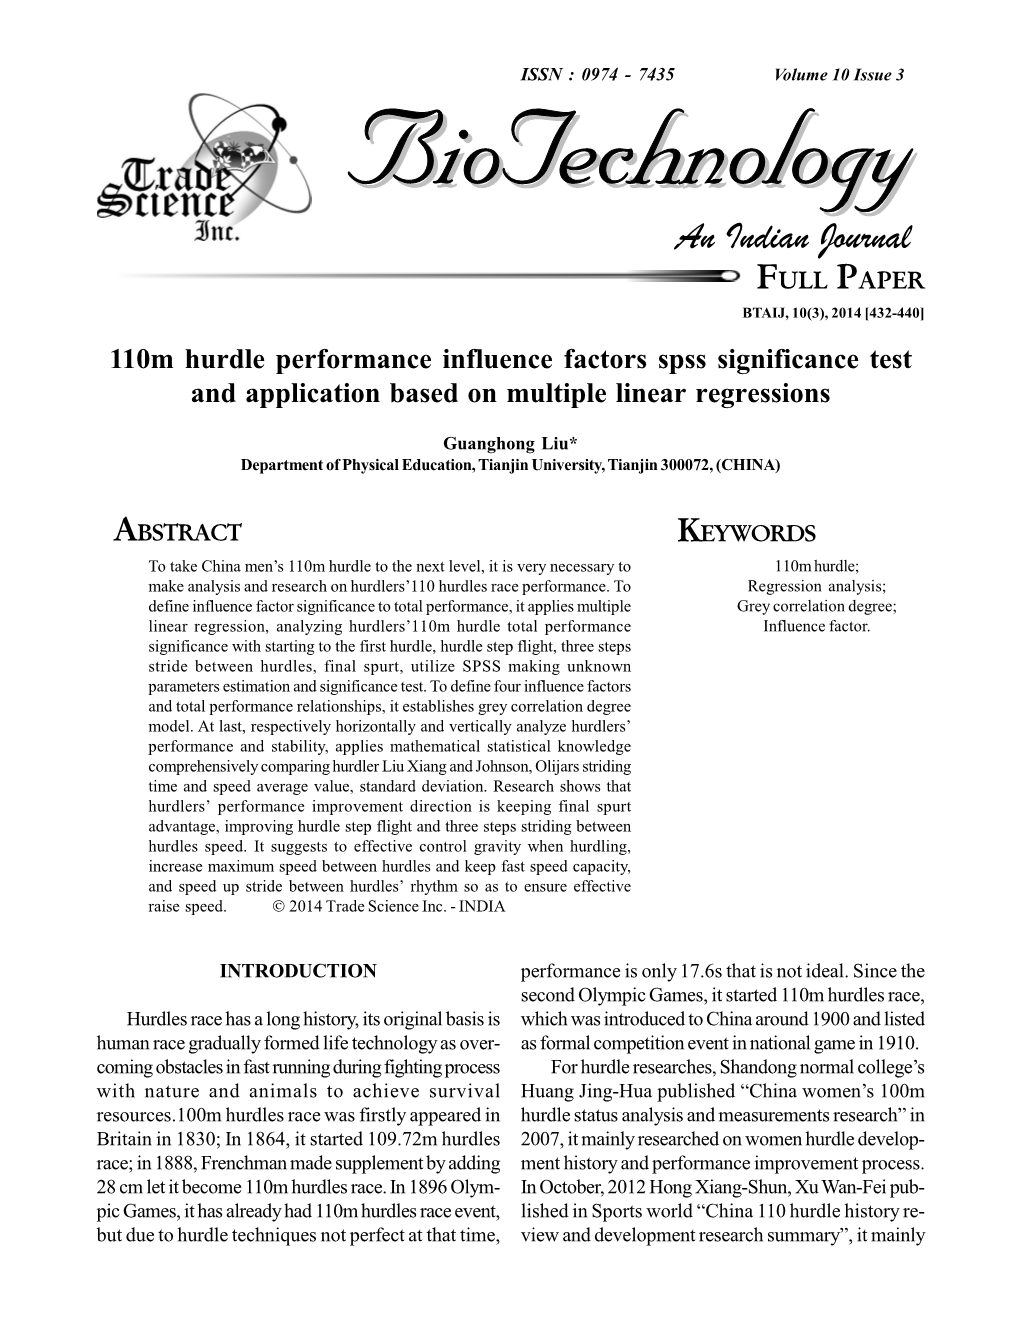 110M Hurdle Performance Influence Factors Spss Significance Test and Application Based on Multiple Linear Regressions